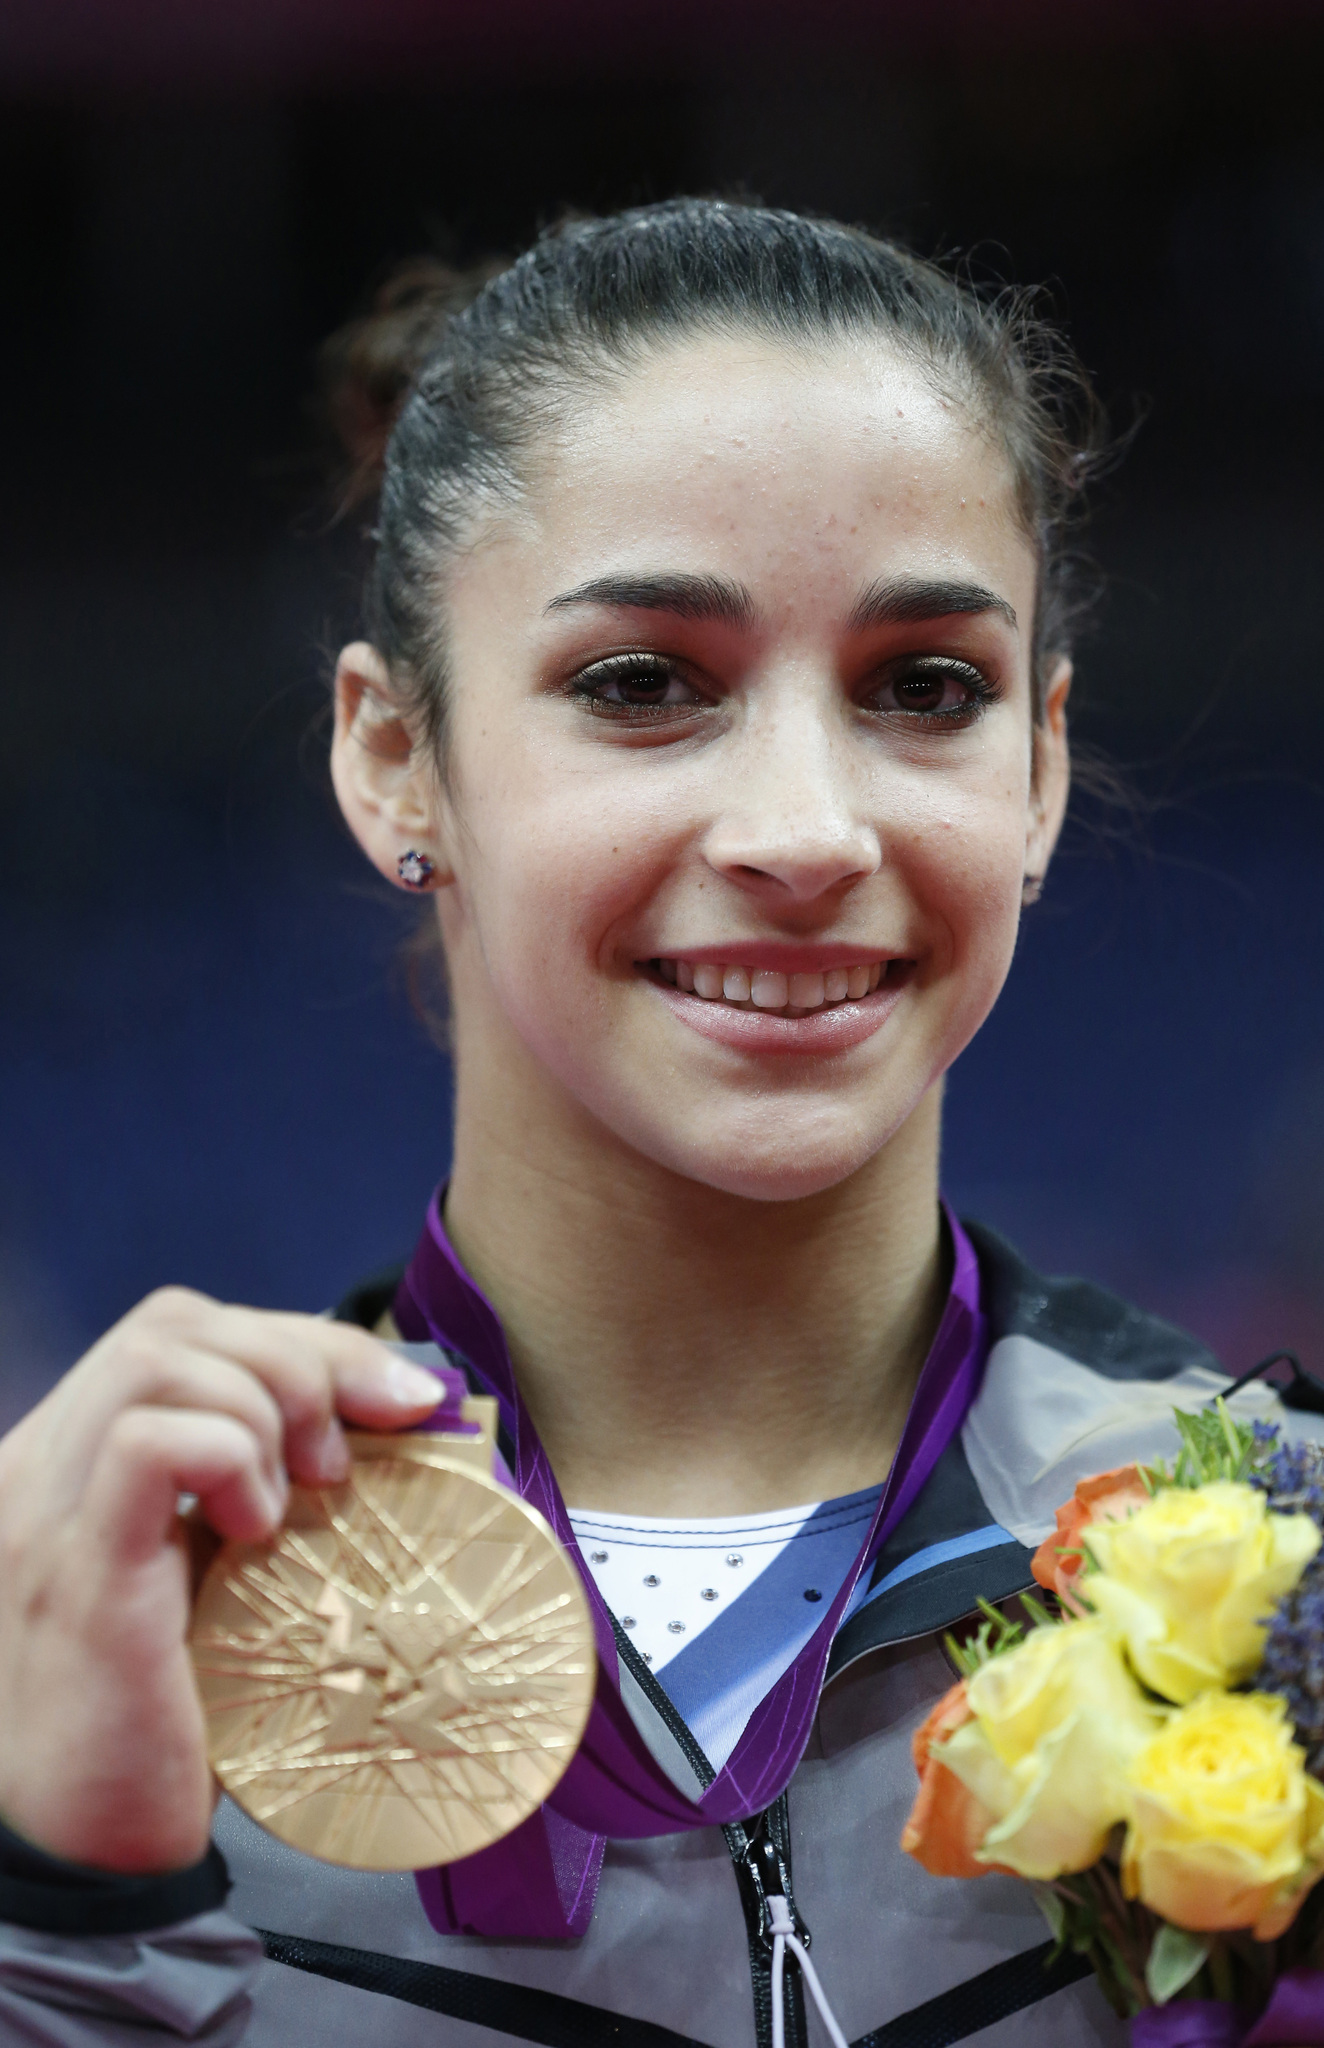 Gold medalist US gymnast Alexandra Raisman poses on the podium of the women's floor exercise of the artistic gymnastics event of the London Olympic Games.